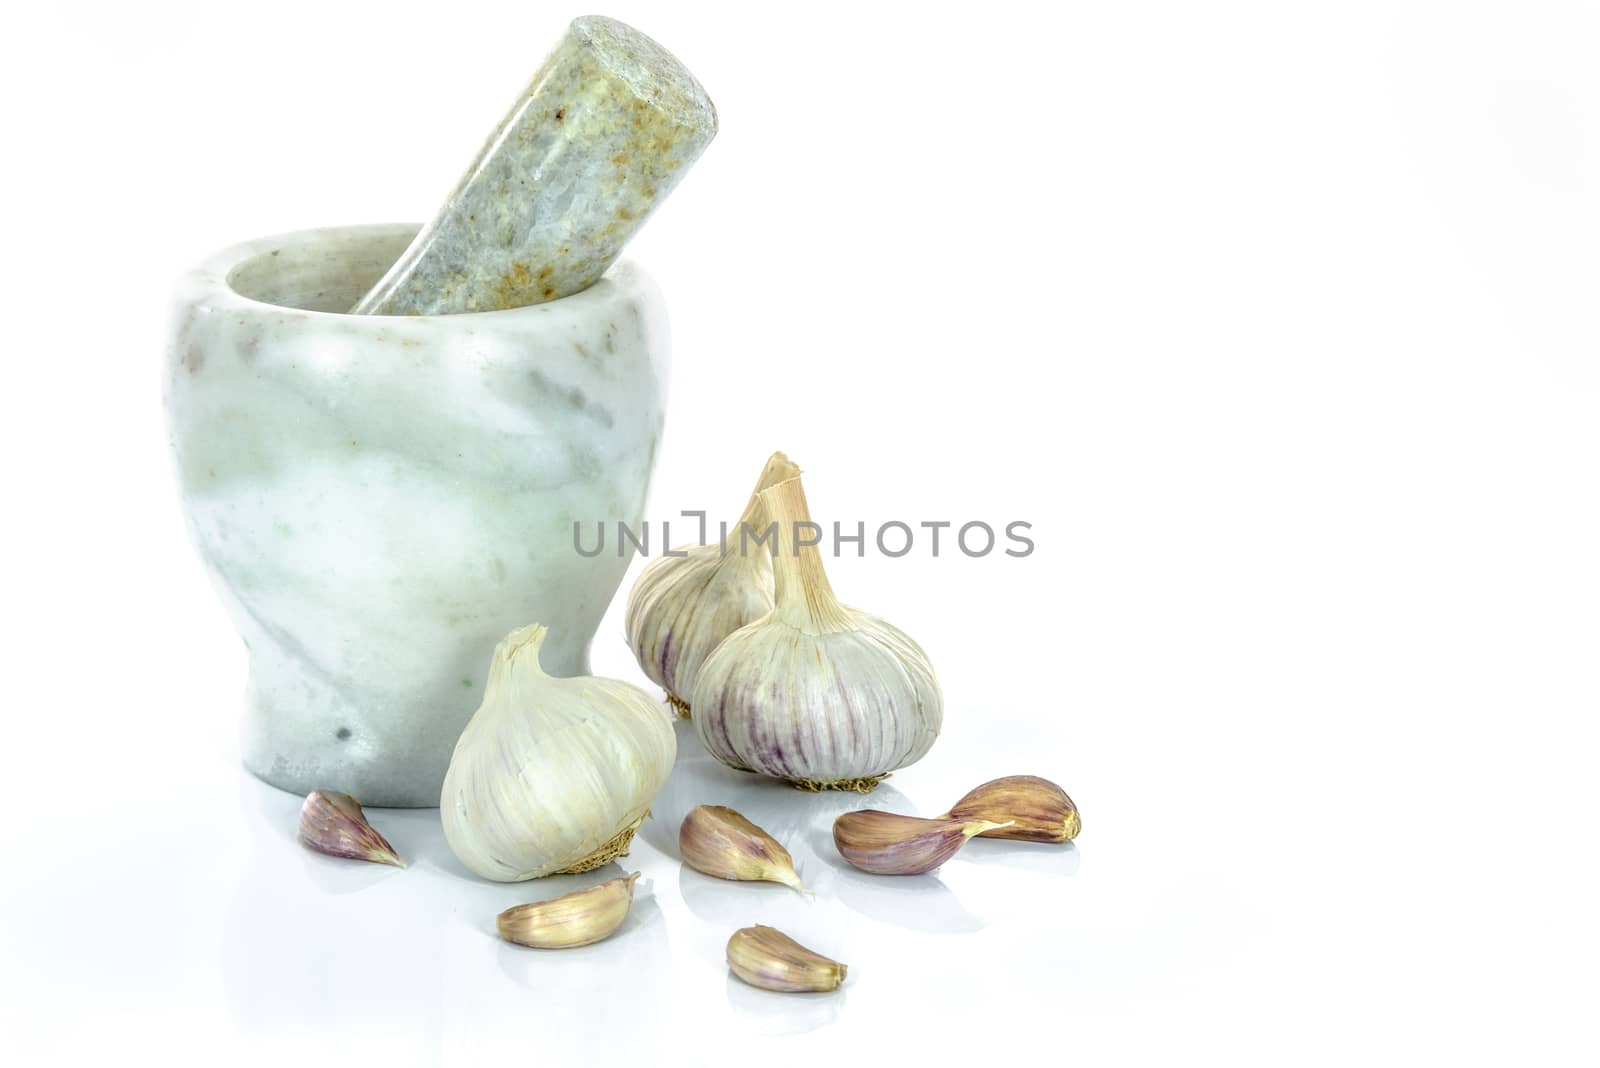 Garlic bulbs and cloves with marble mortar and pestle isolated on a white background.